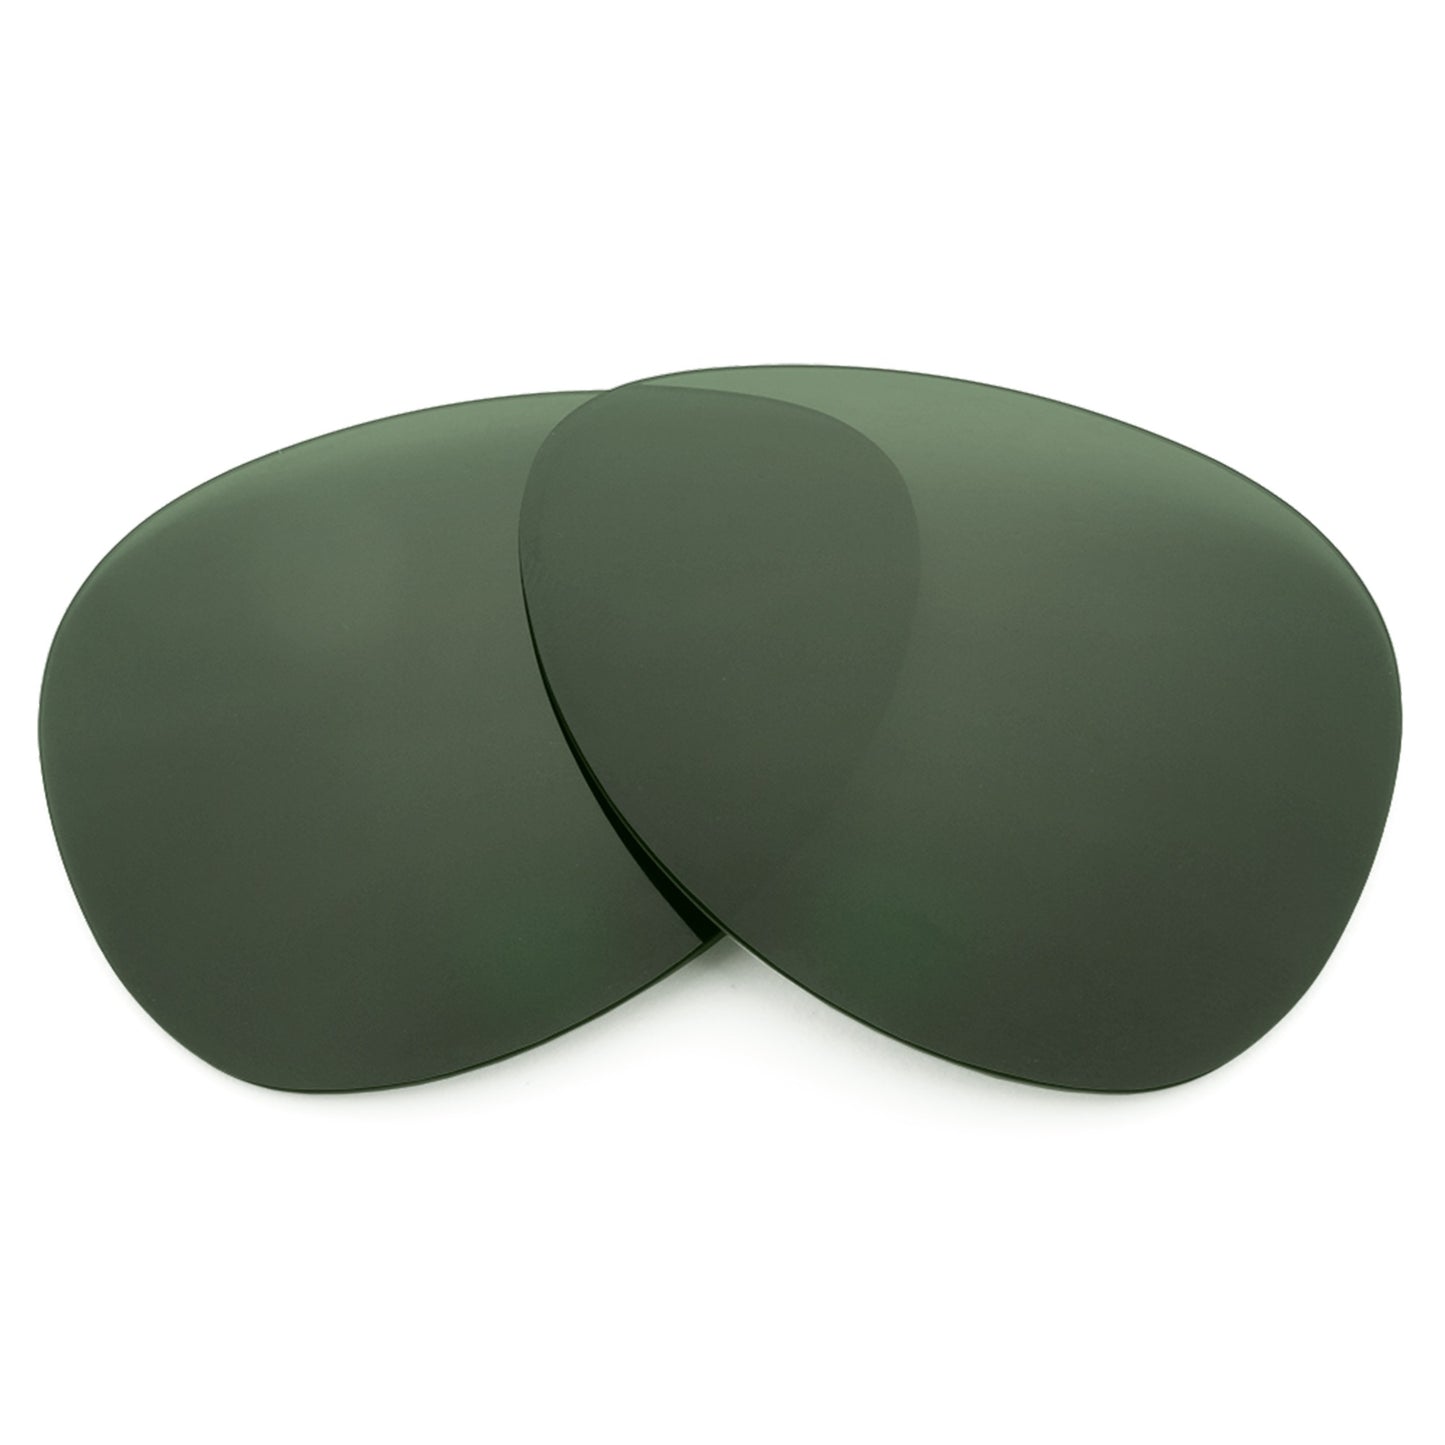 Revant replacement lenses for Ray-Ban Aviator Carbon Fibre RB8307 58mm Elite Polarized Gray Green